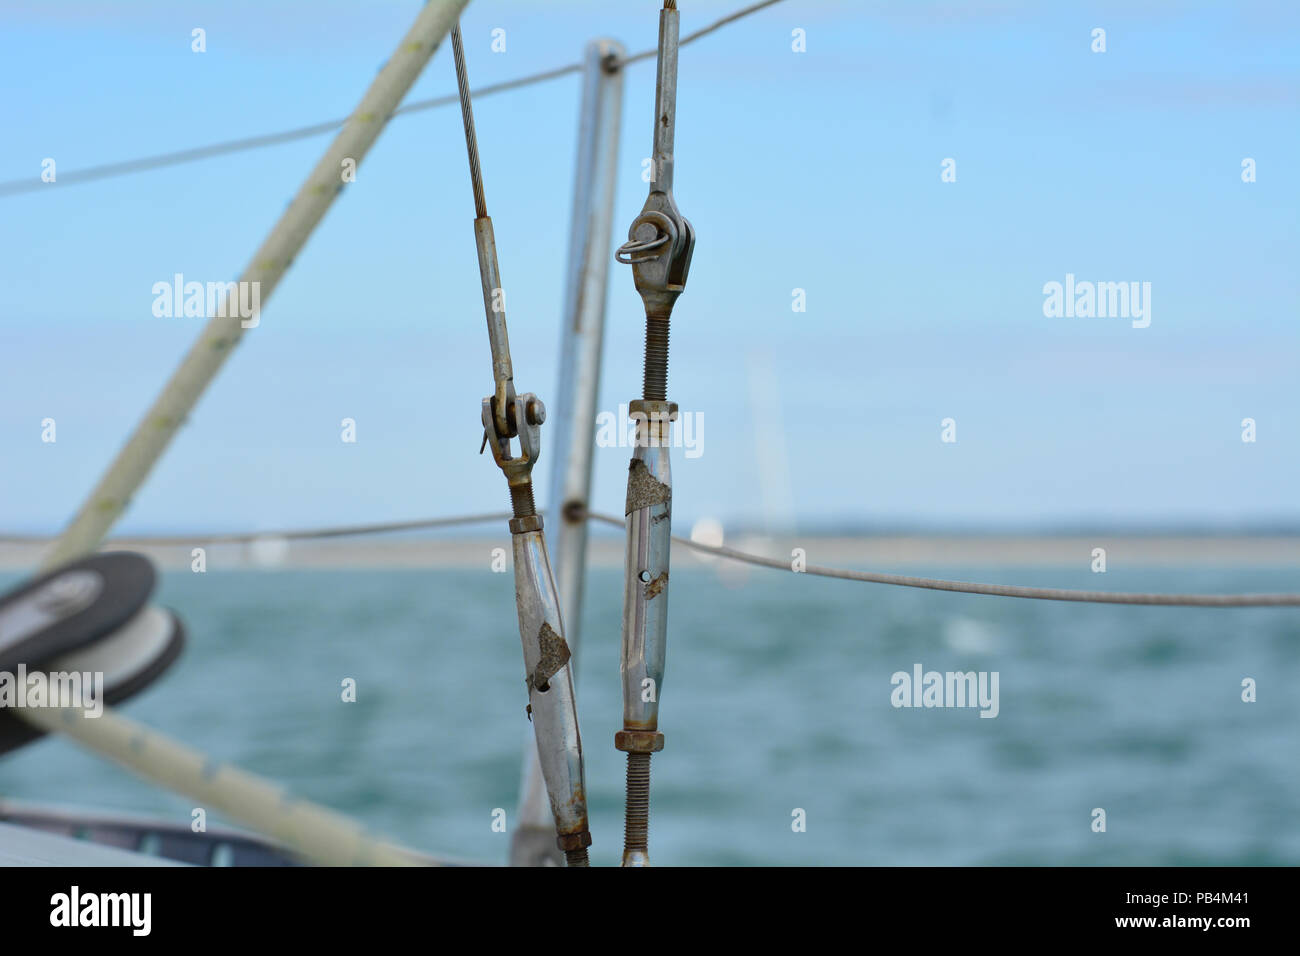 Standing rigging on a small yacht Stock Photo